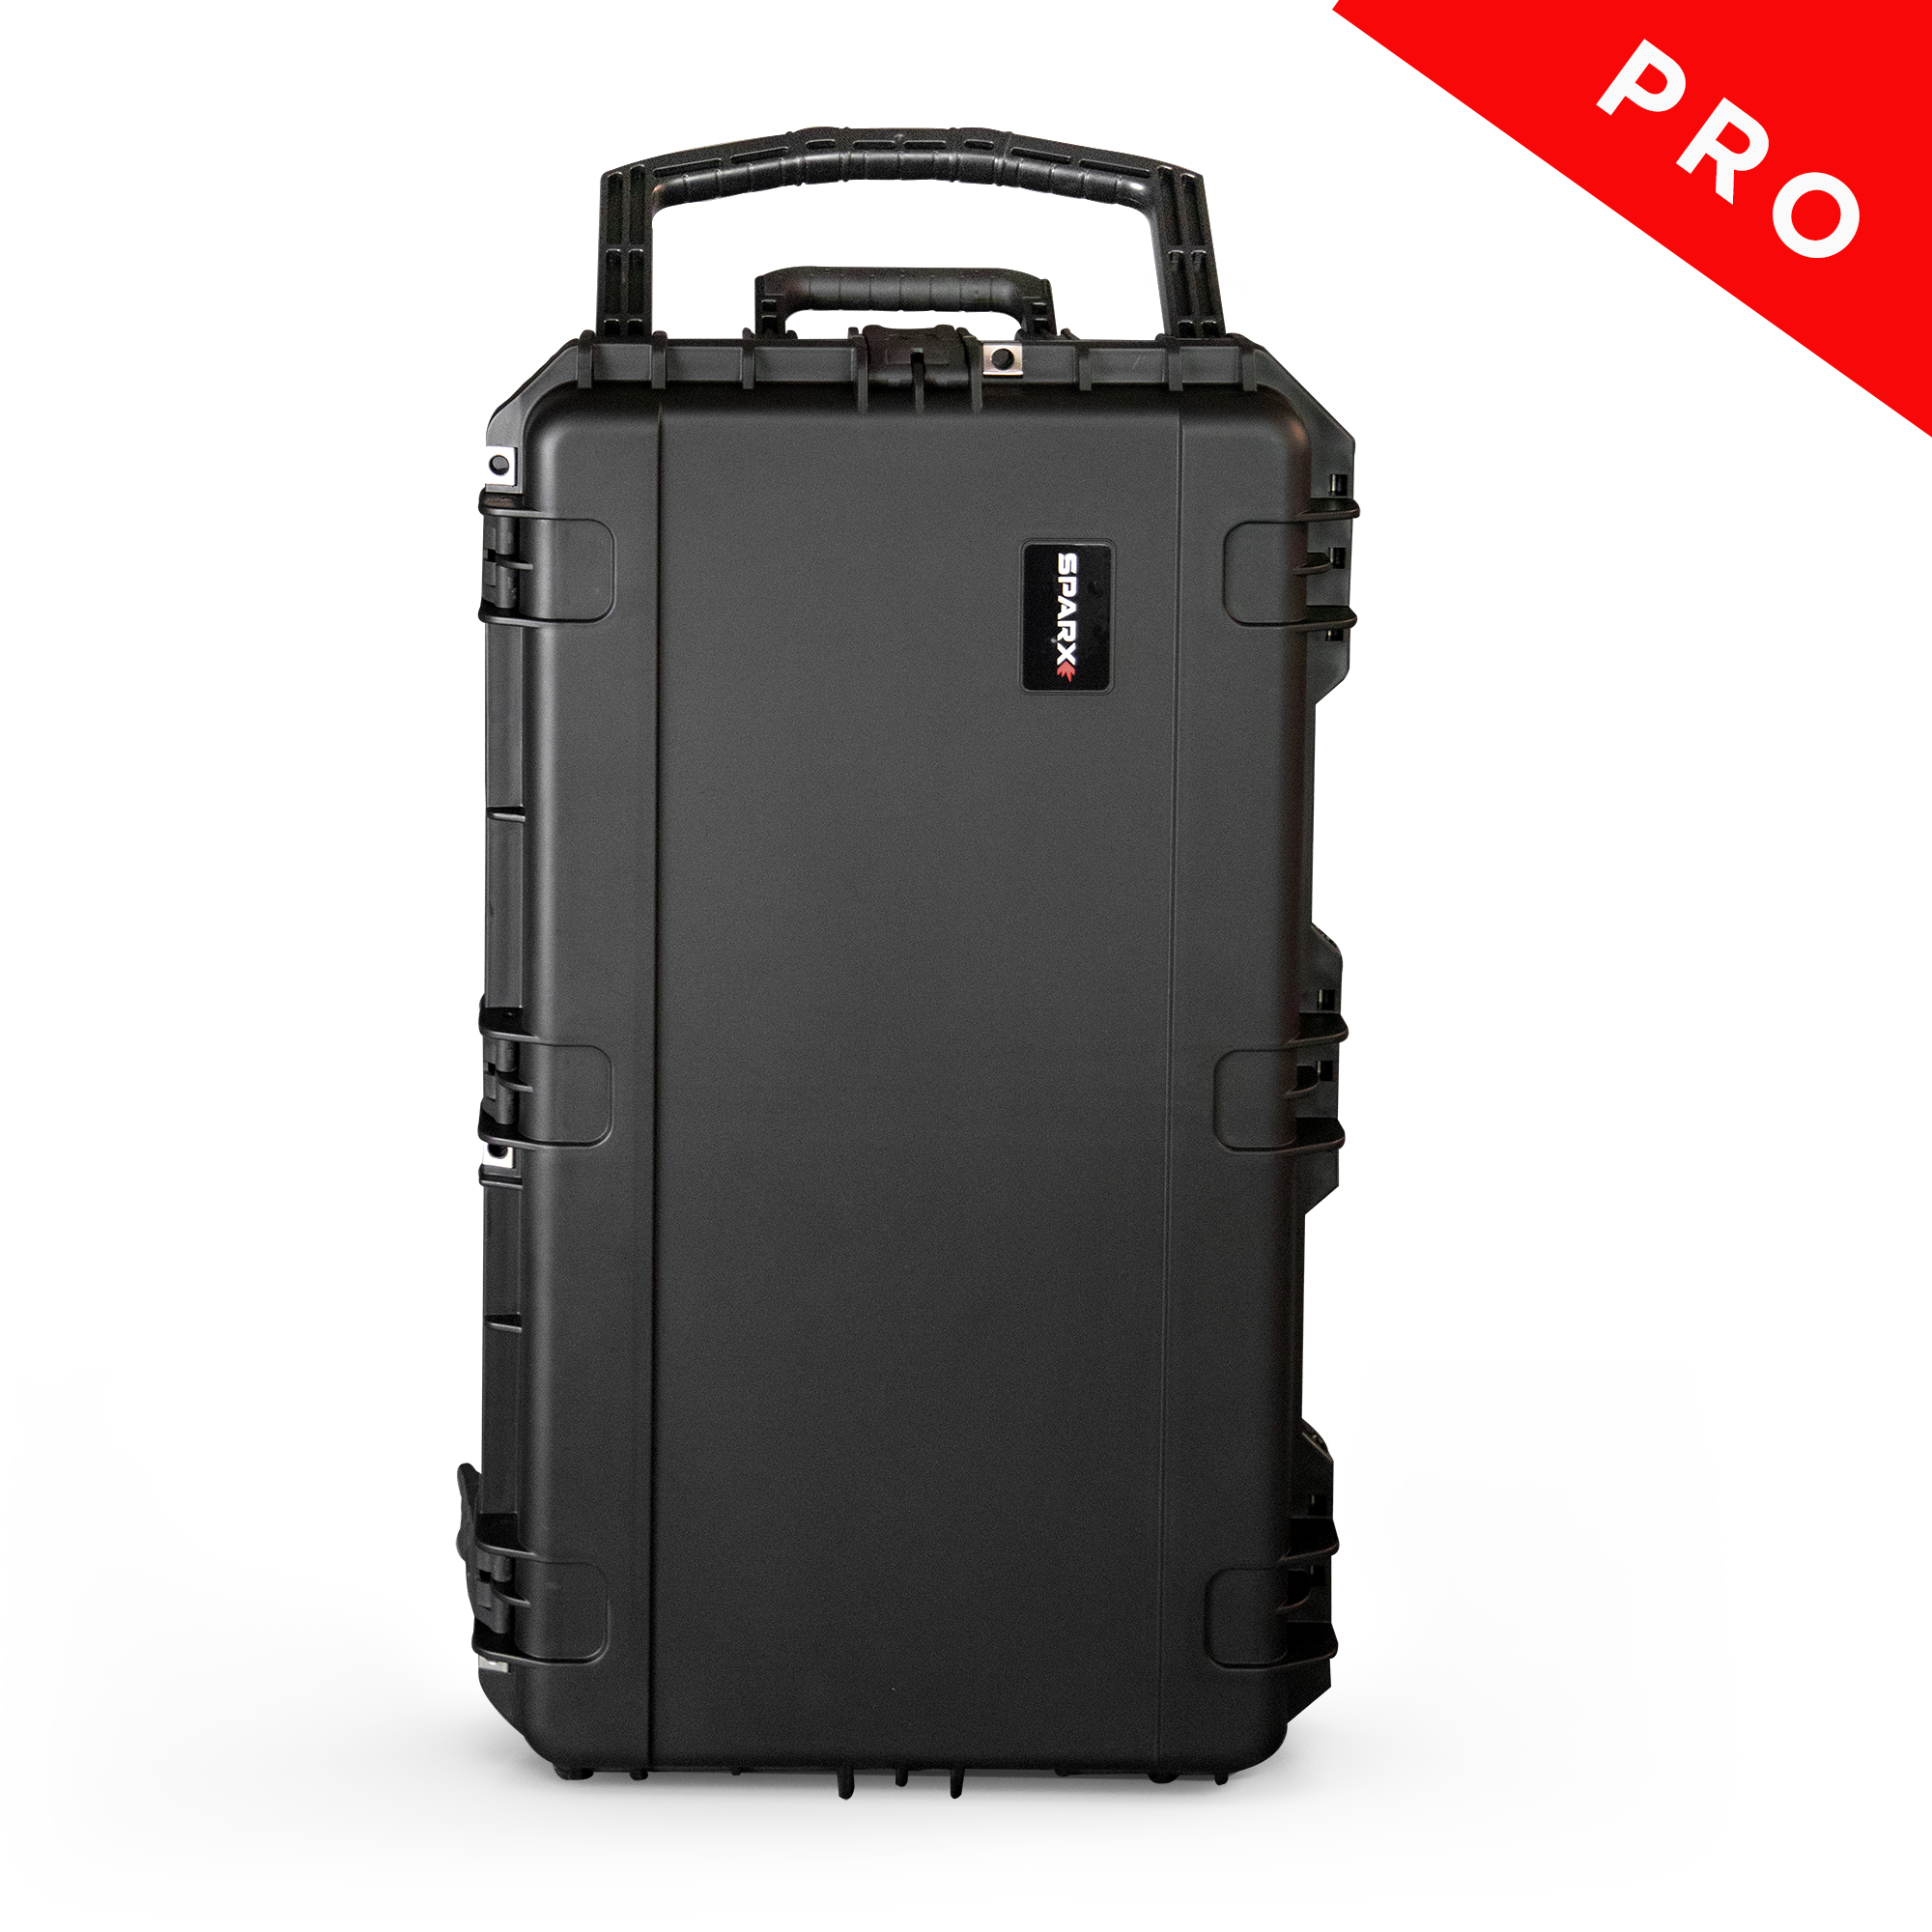 Image of Sparx Hard Travel case Pro - with Pro called out in upper corner